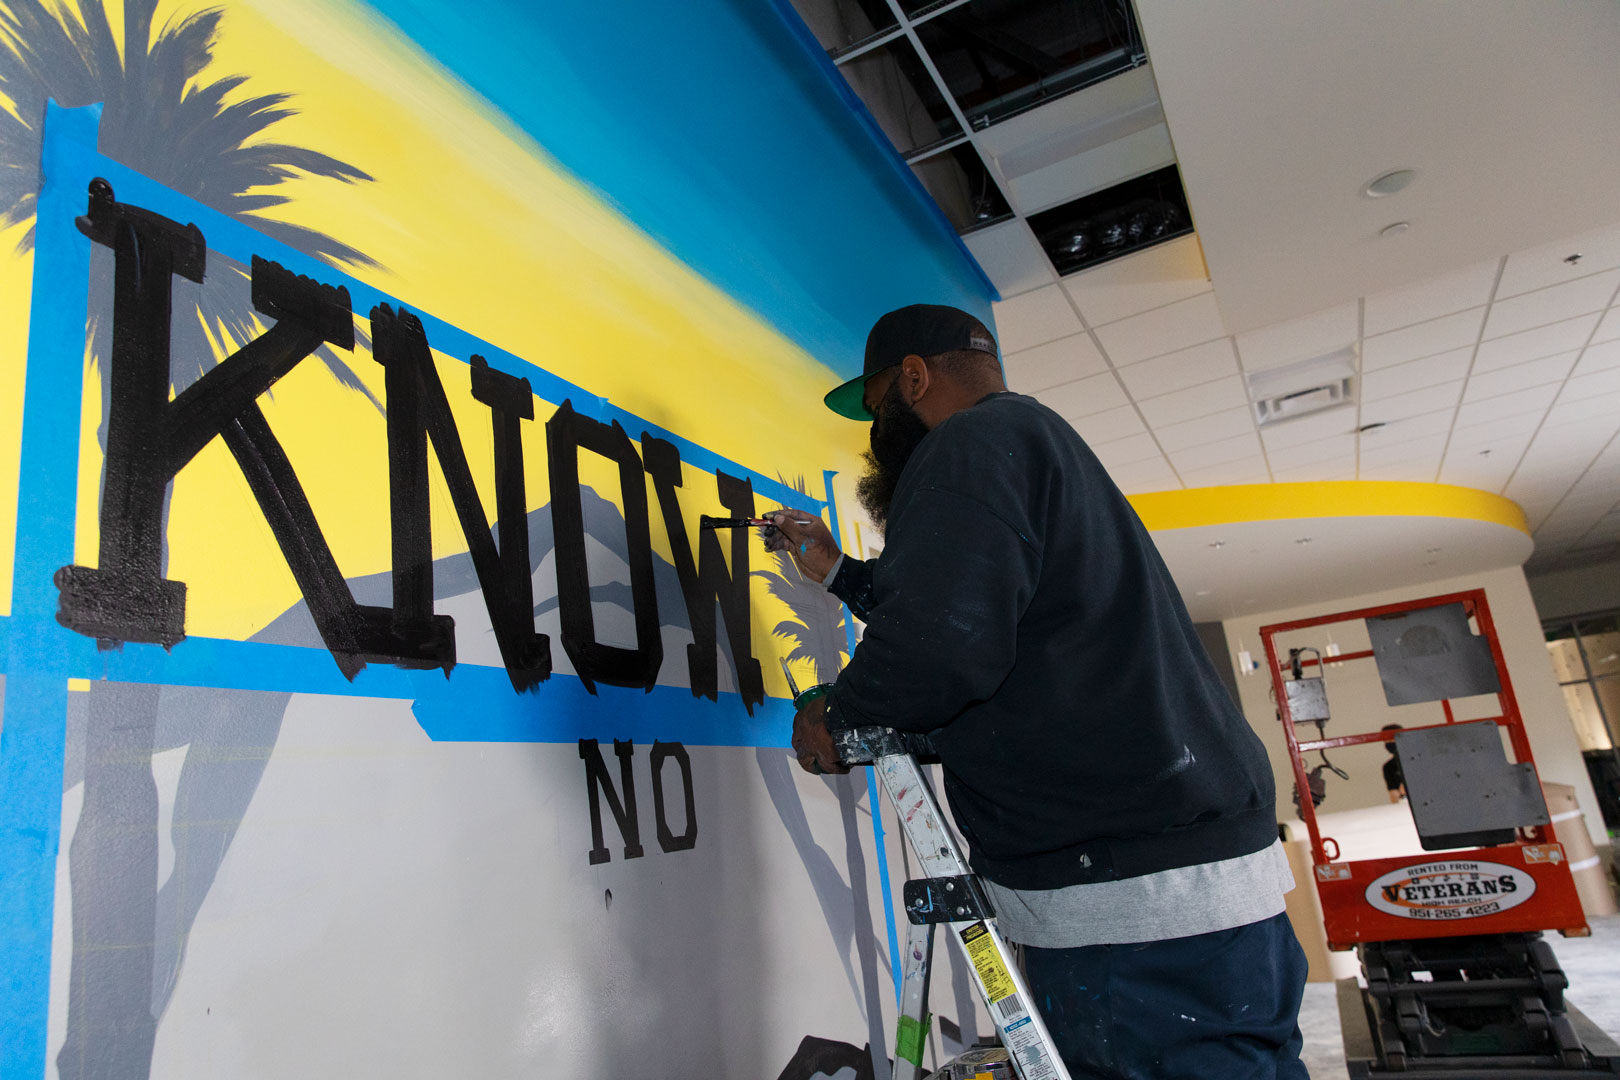 An Interview With Chuze Fitness Fontana Muralist, Dack Williams